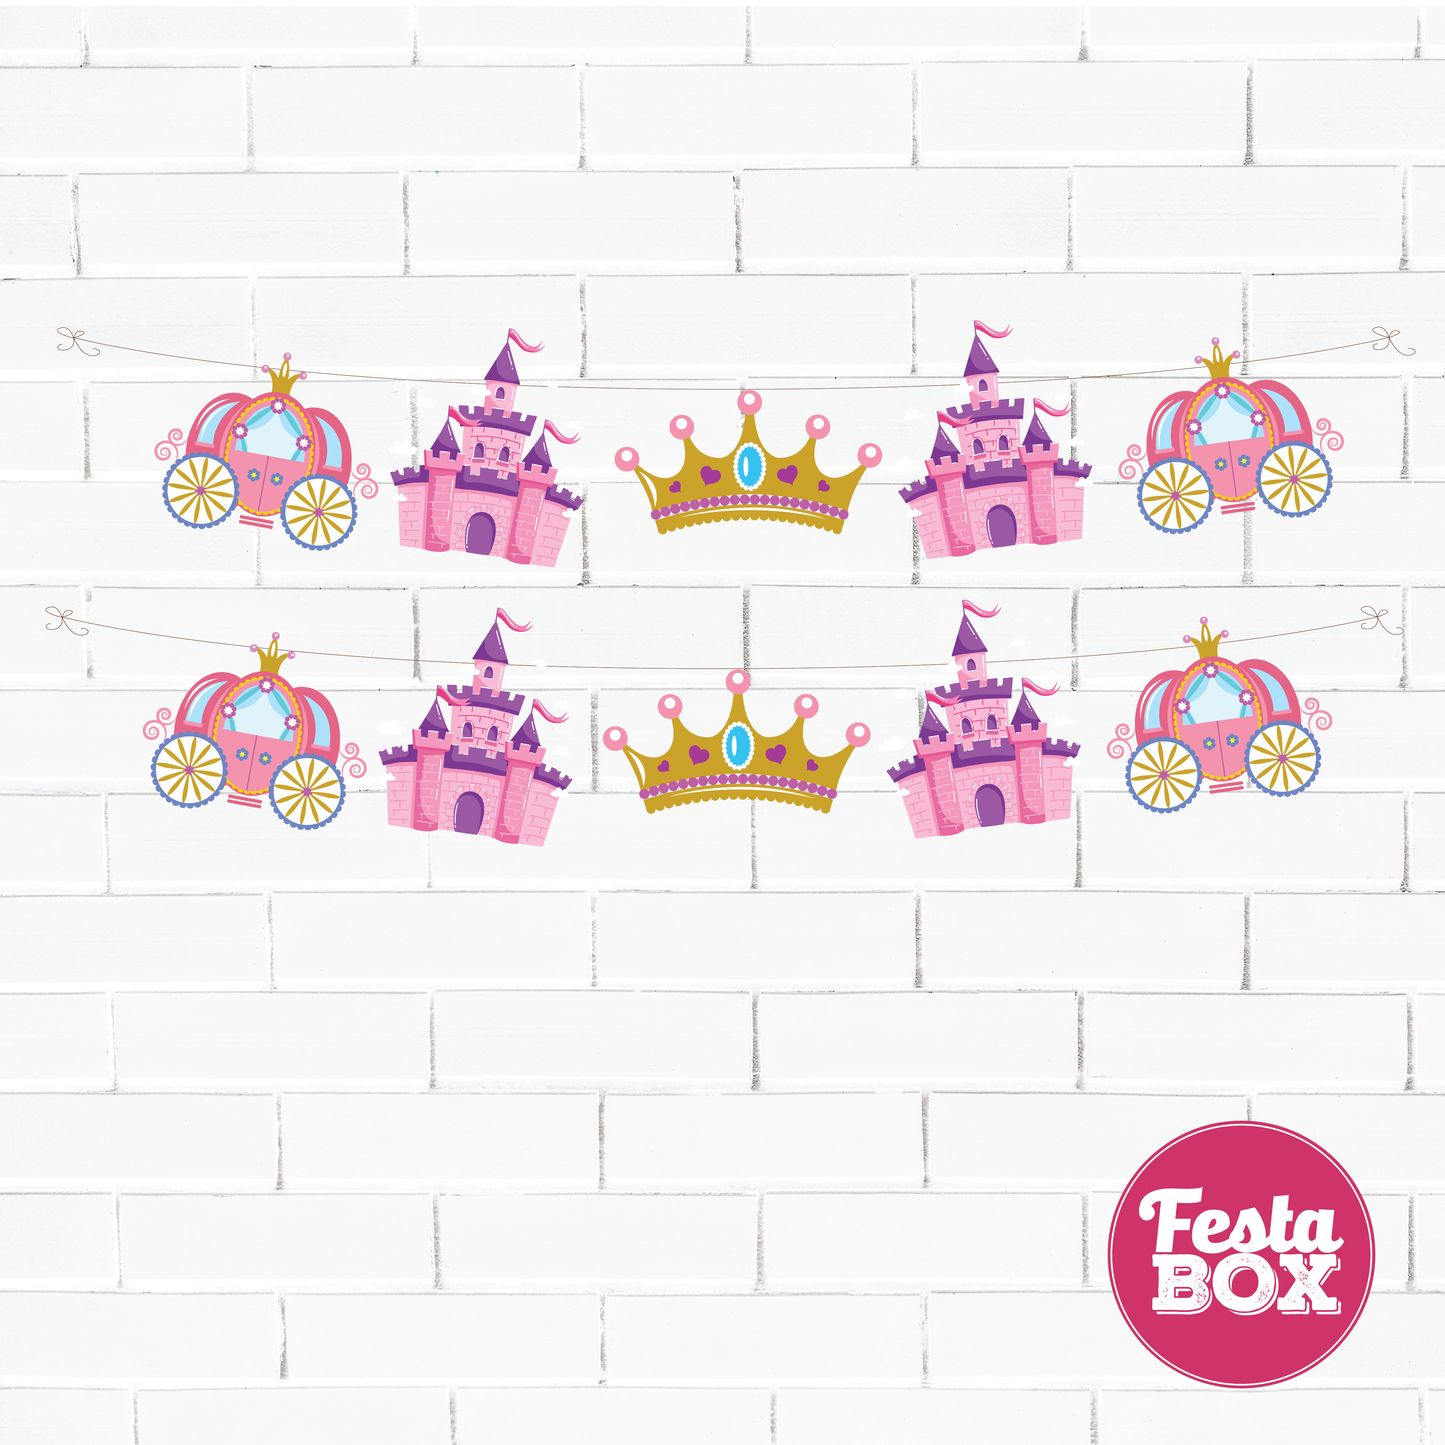 Background Banner for Birthday Party Decoration - Princess Theme - Option 2